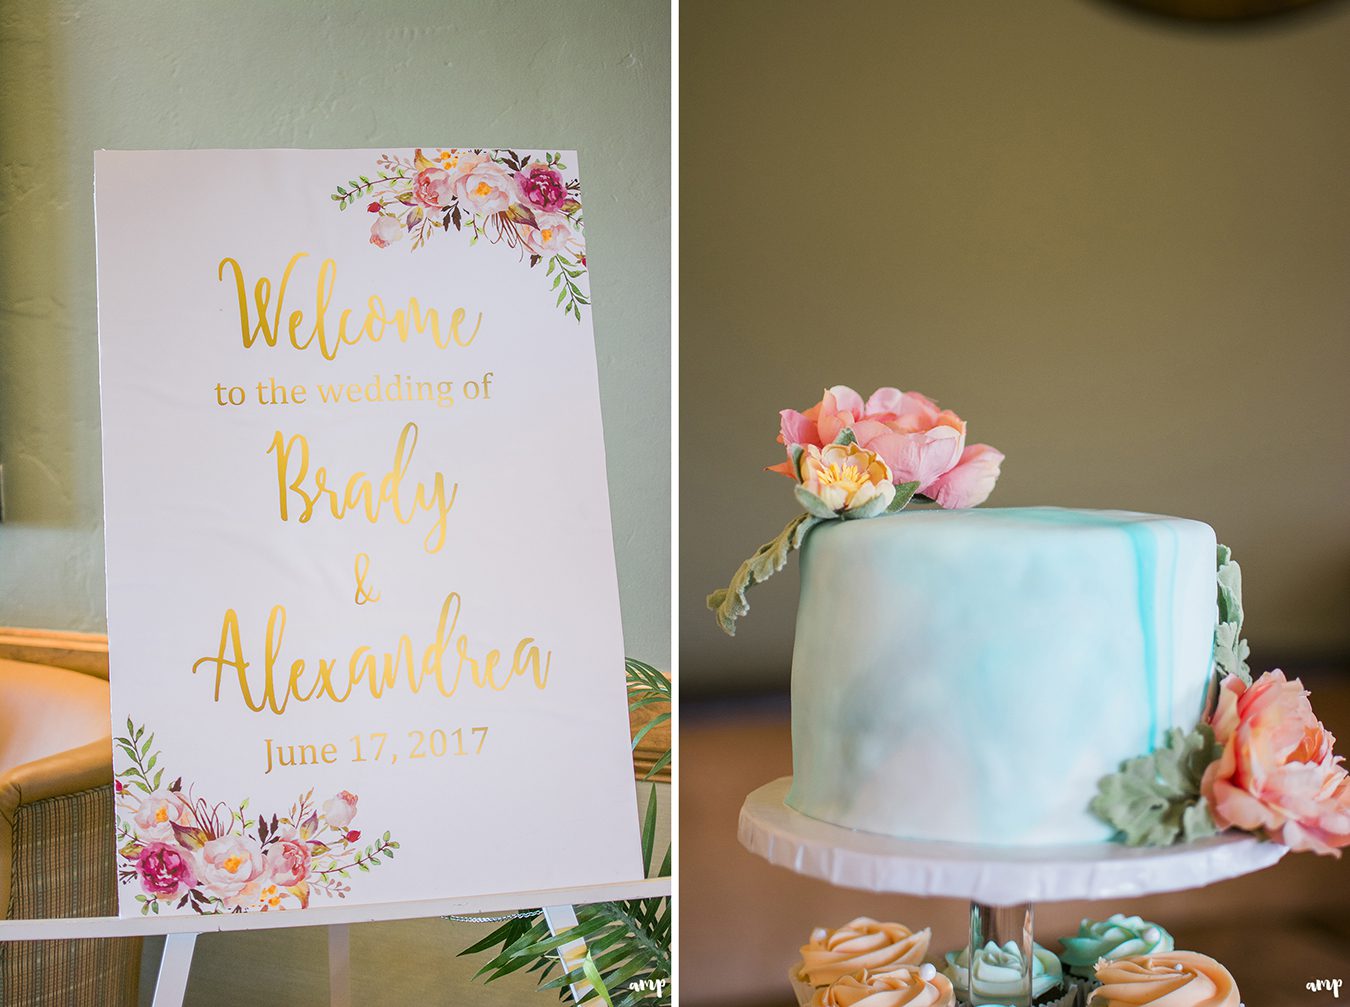 Marbled biscoff cake and welcome sign